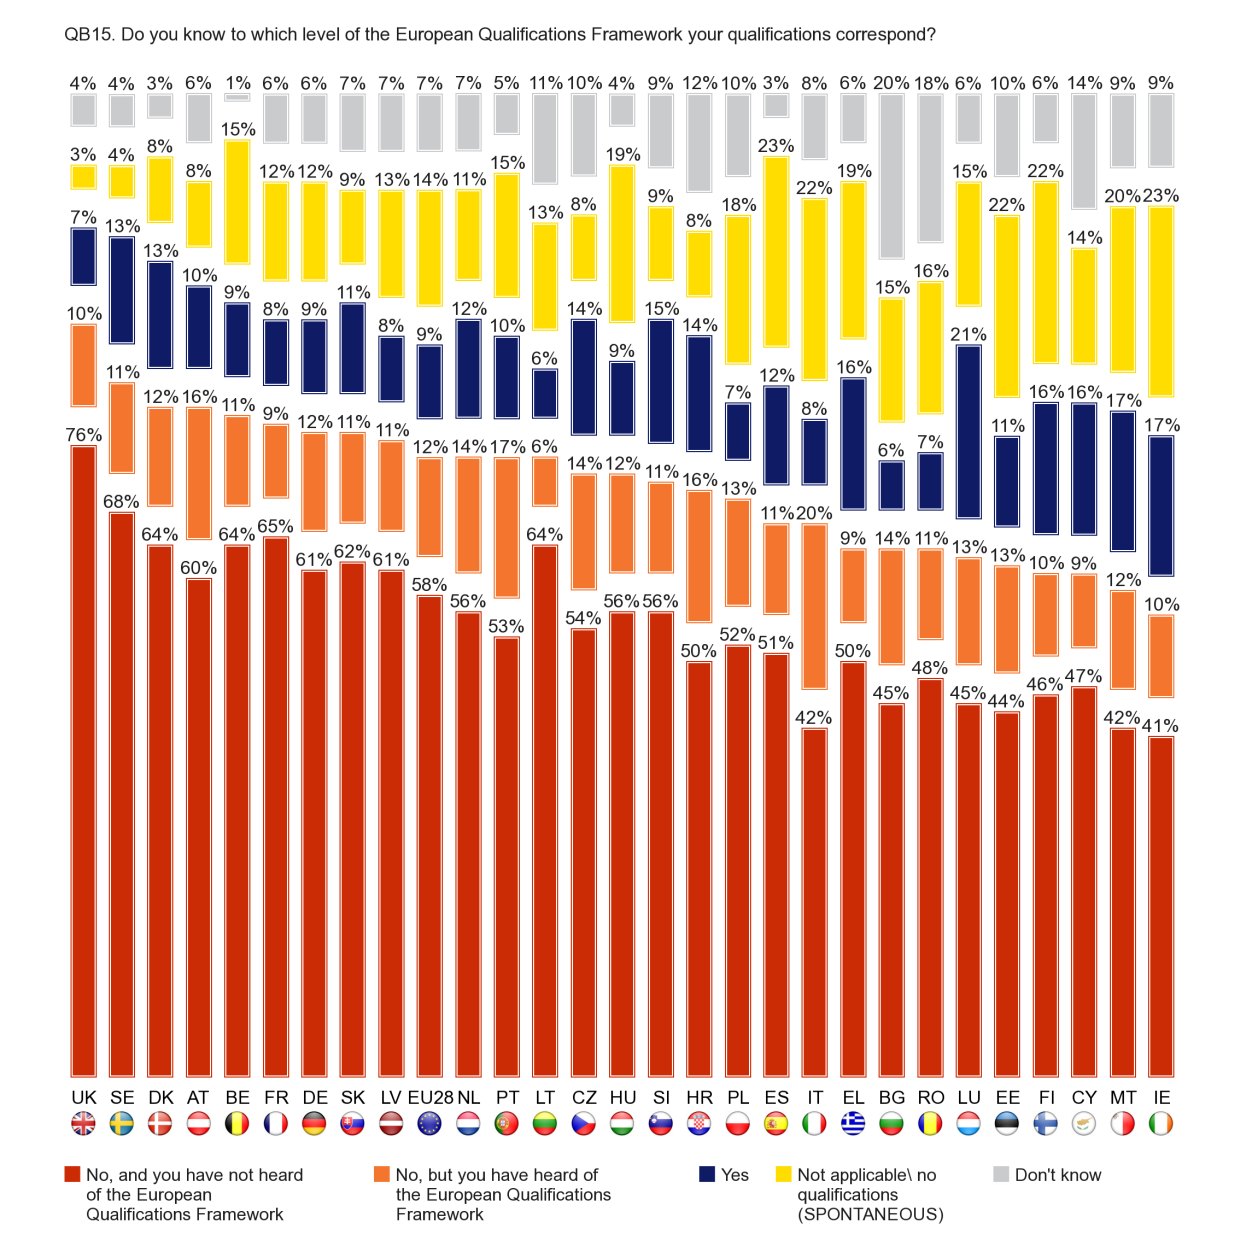 In the findings for individual Member States, respondents in Luxembourg (21%), Malta (17%) and Ireland (17%) are most likely to say that they know the level of the European Qualifications Framework